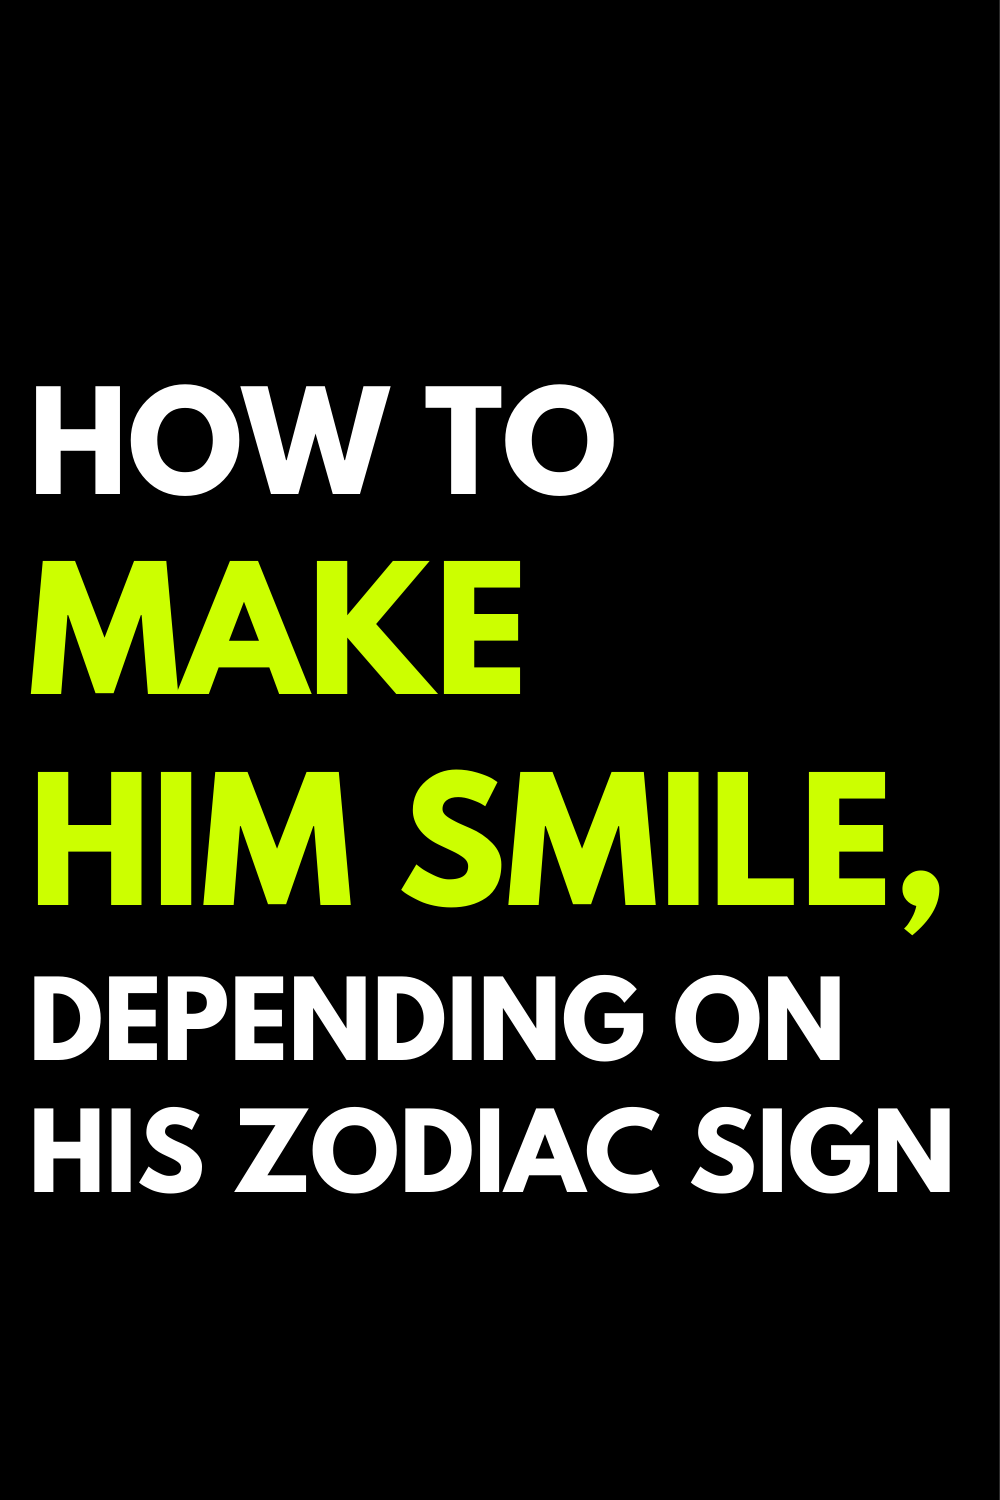 How to make him smile, depending on his zodiac sign